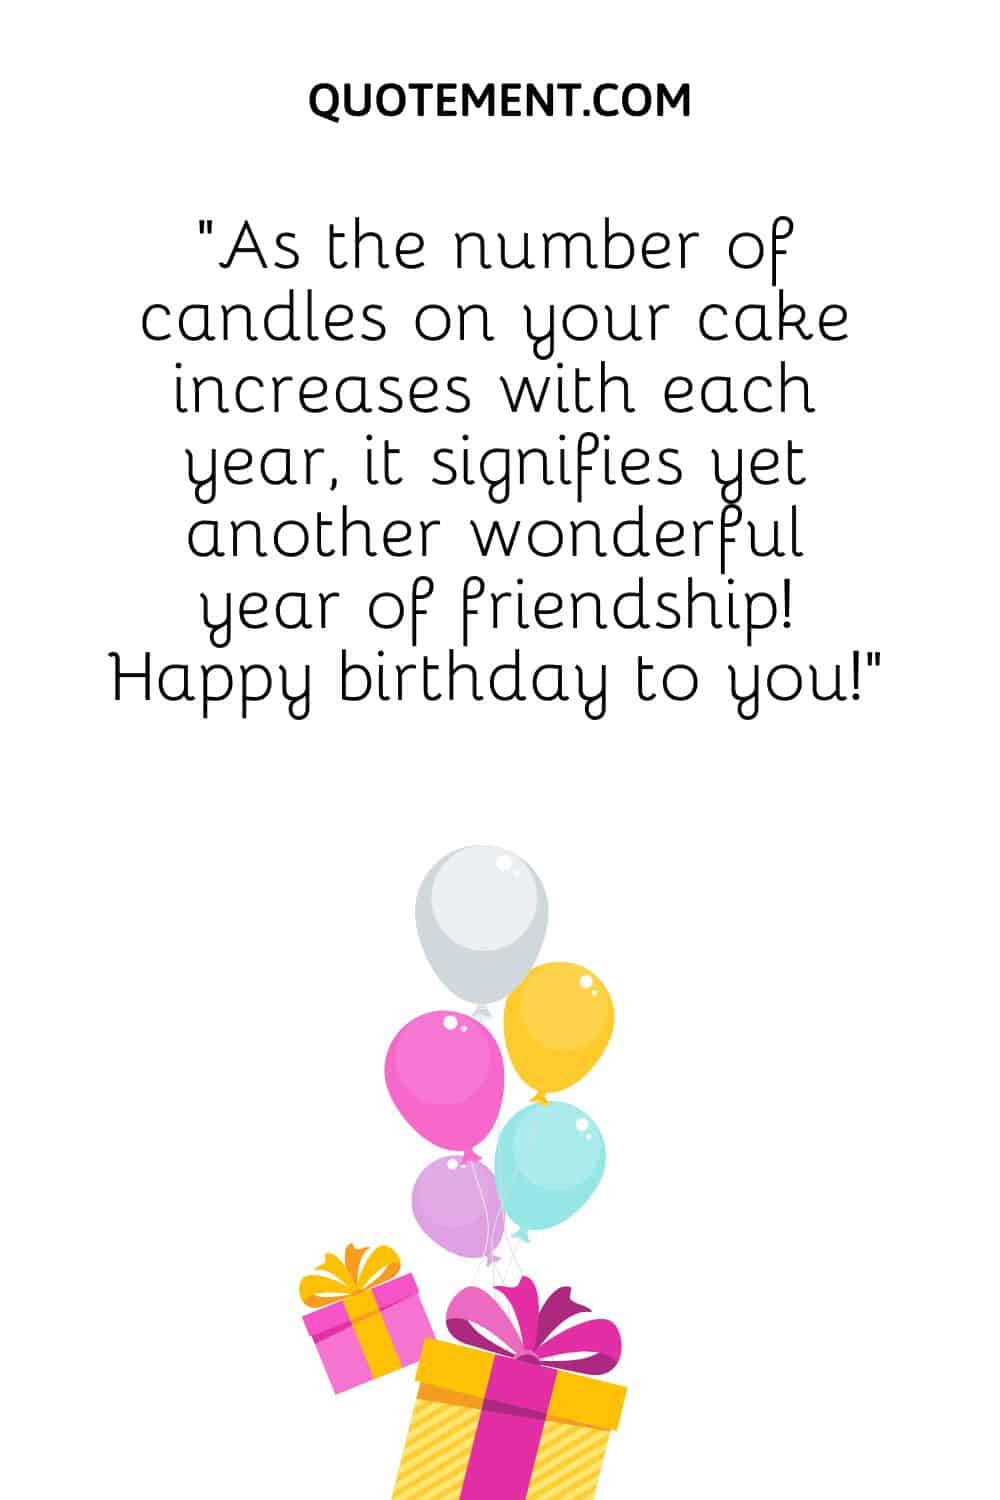 As the number of candles on your cake increases with each year